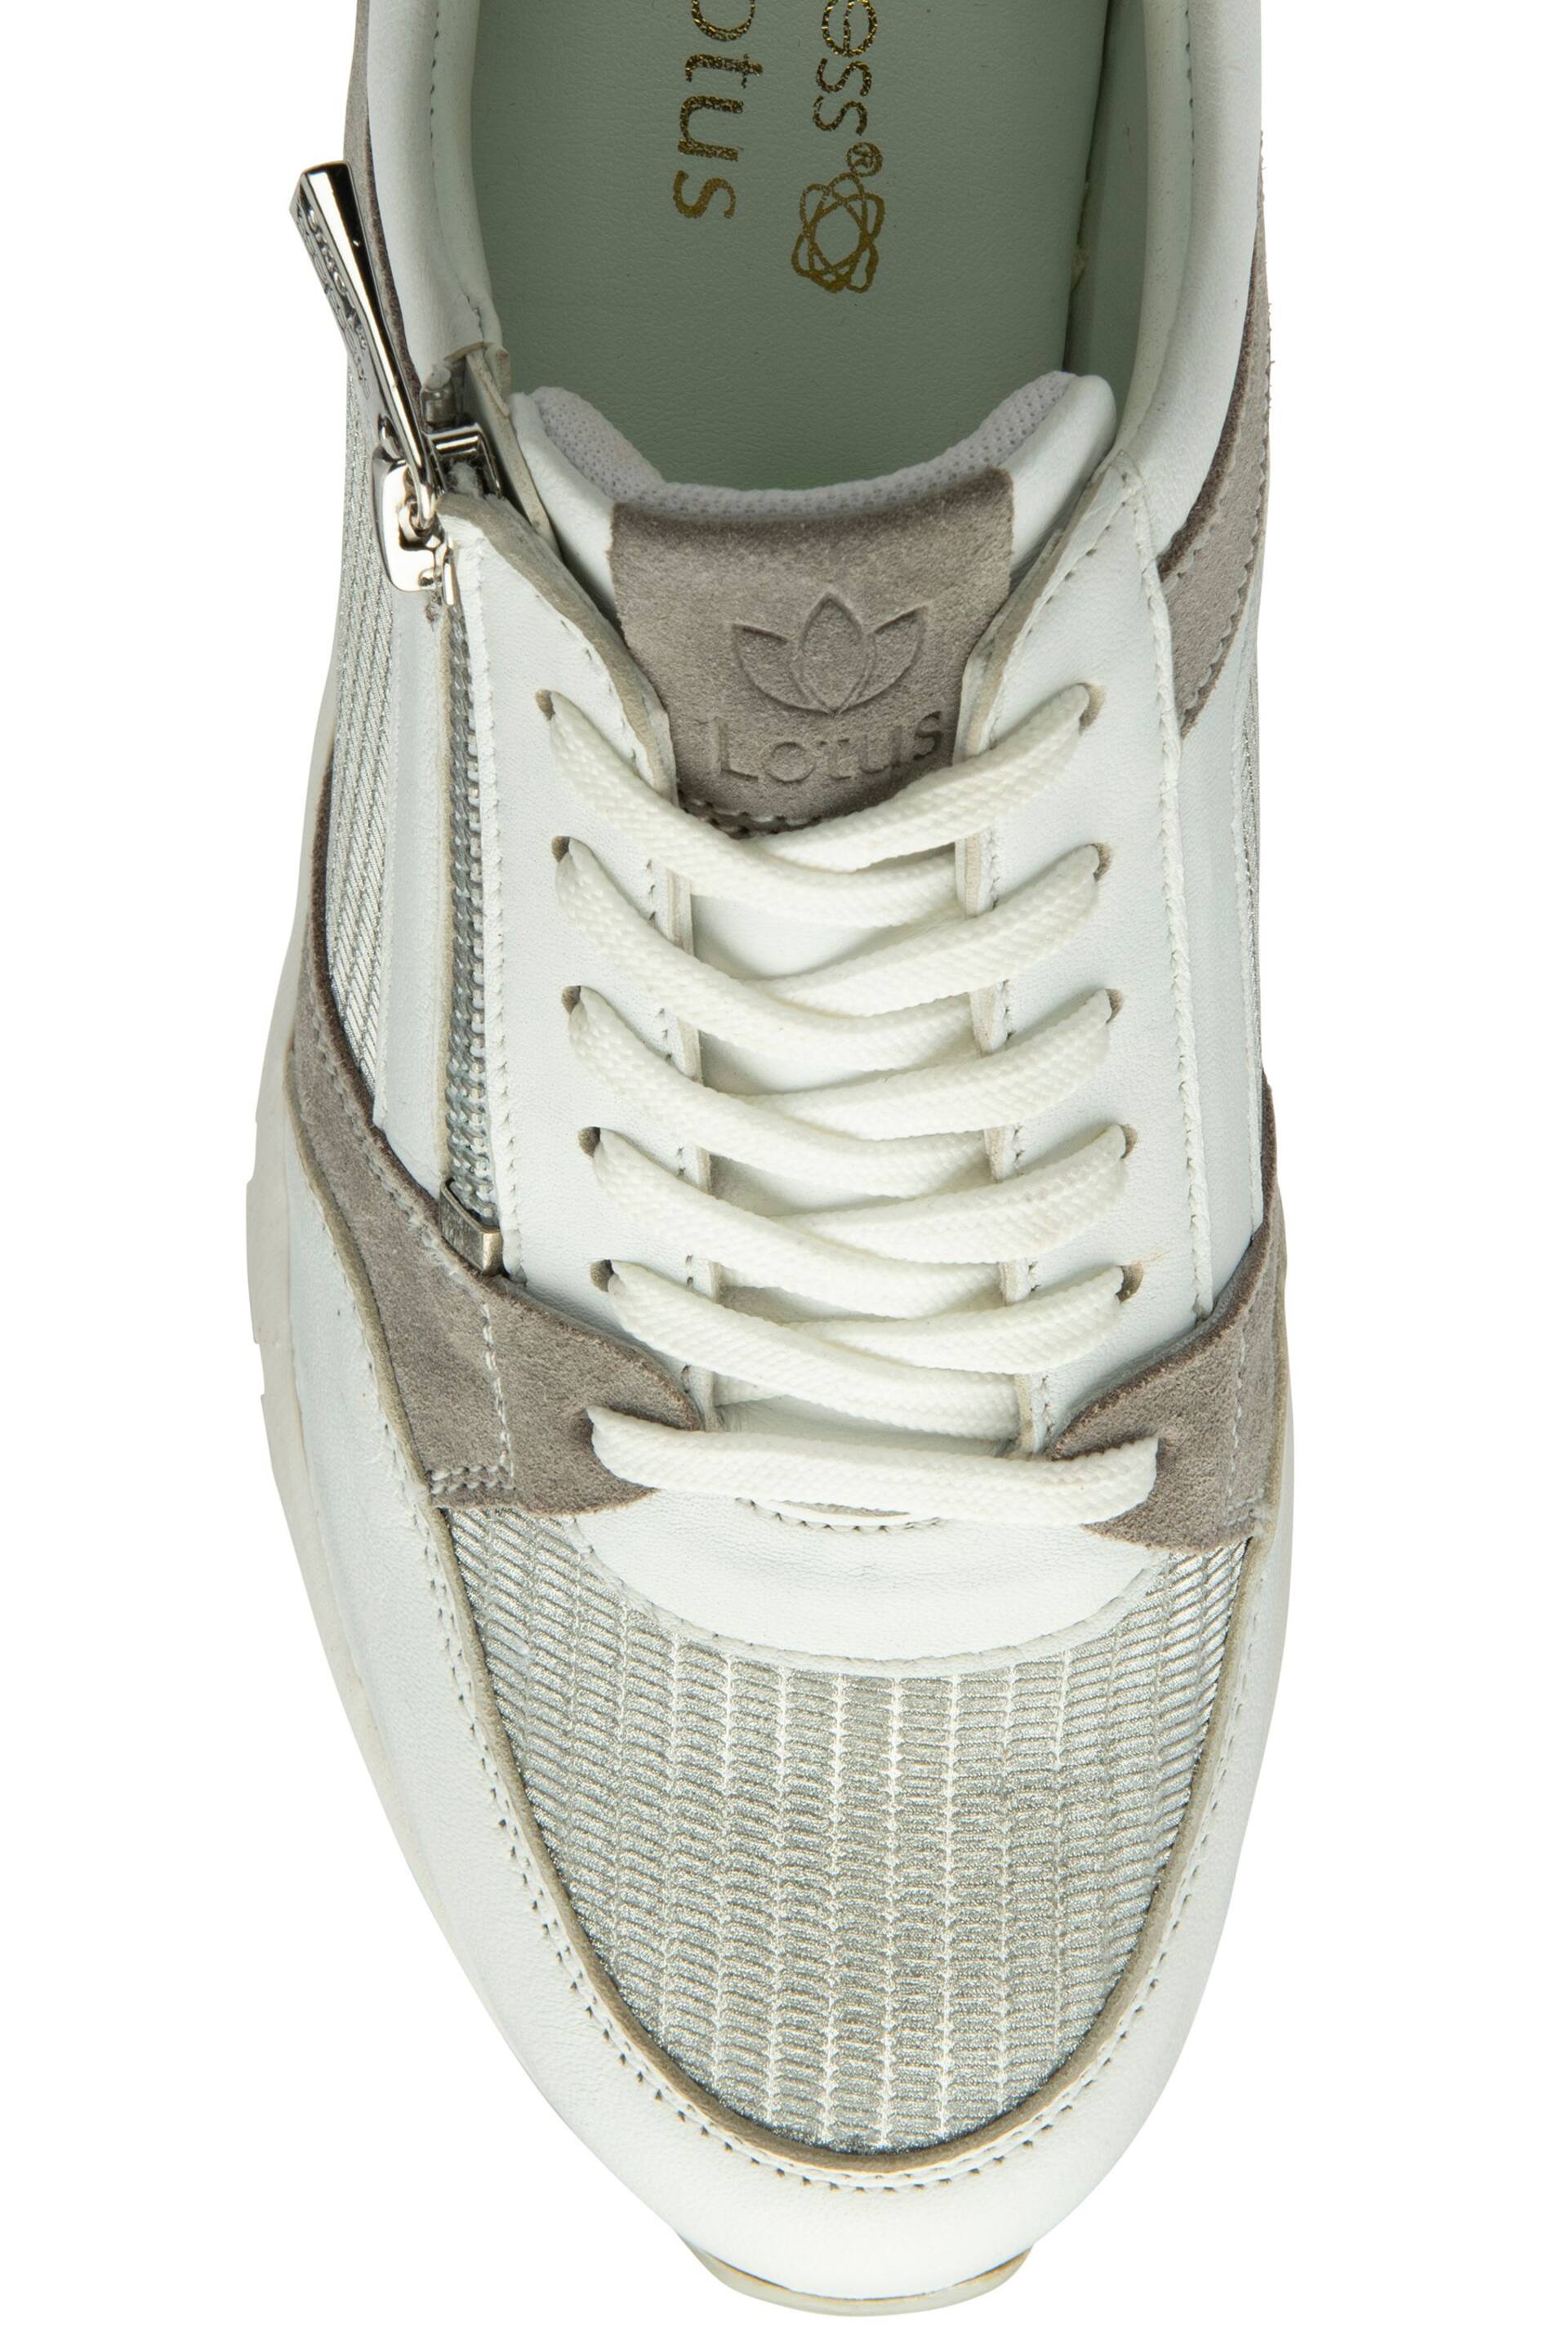 Lotus White Zip-Up Wedge Trainers - Image 4 of 4